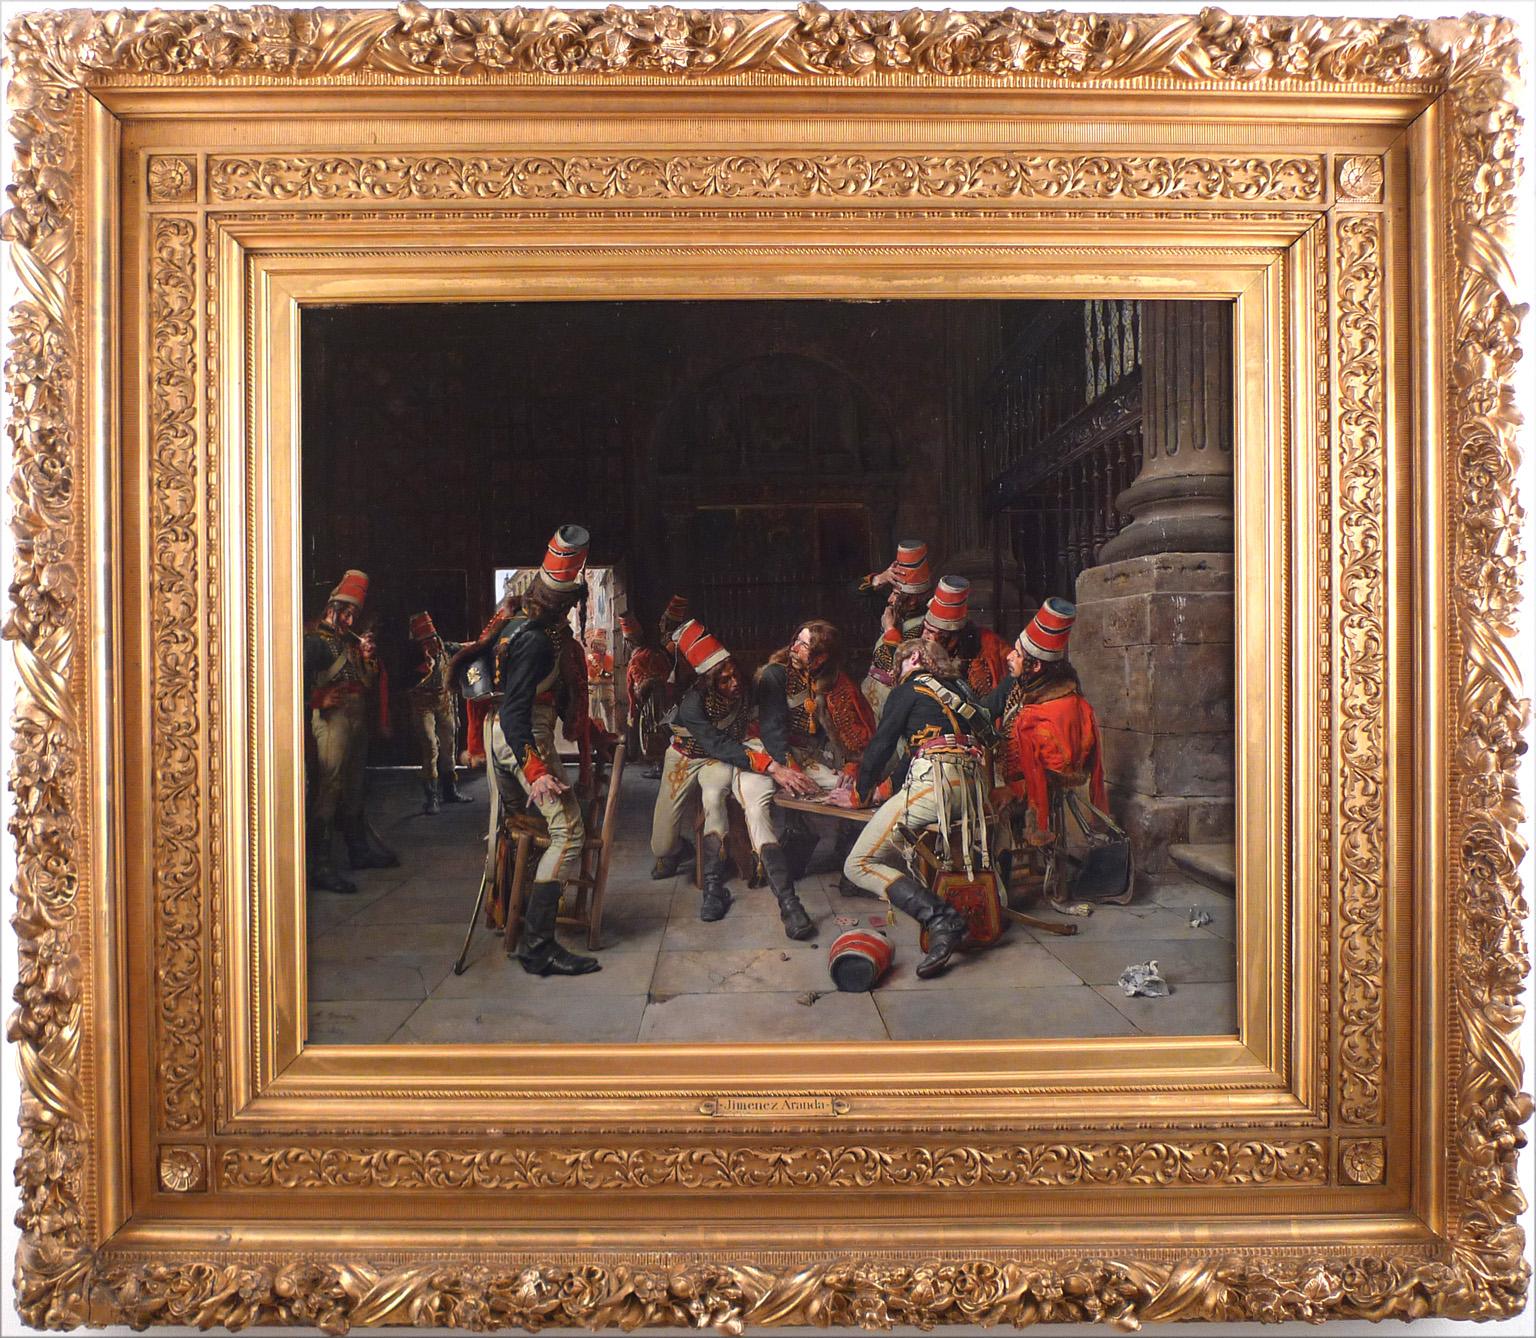 JOSÉ JIMÉNEZ ARANDA
Spanish, 1837 - 1903
HUSSARS AT REST
signed, located and dated “Jz. Aranda. / Paris 1884.” (lower left)
oil on wood panel
21 x 26-5/8 inches (53.5 x 67.5 cm)
framed: 35-1/4 x 40-1/2 inches (89.5 x 102.5 cm.)

PROVENANCE
Private